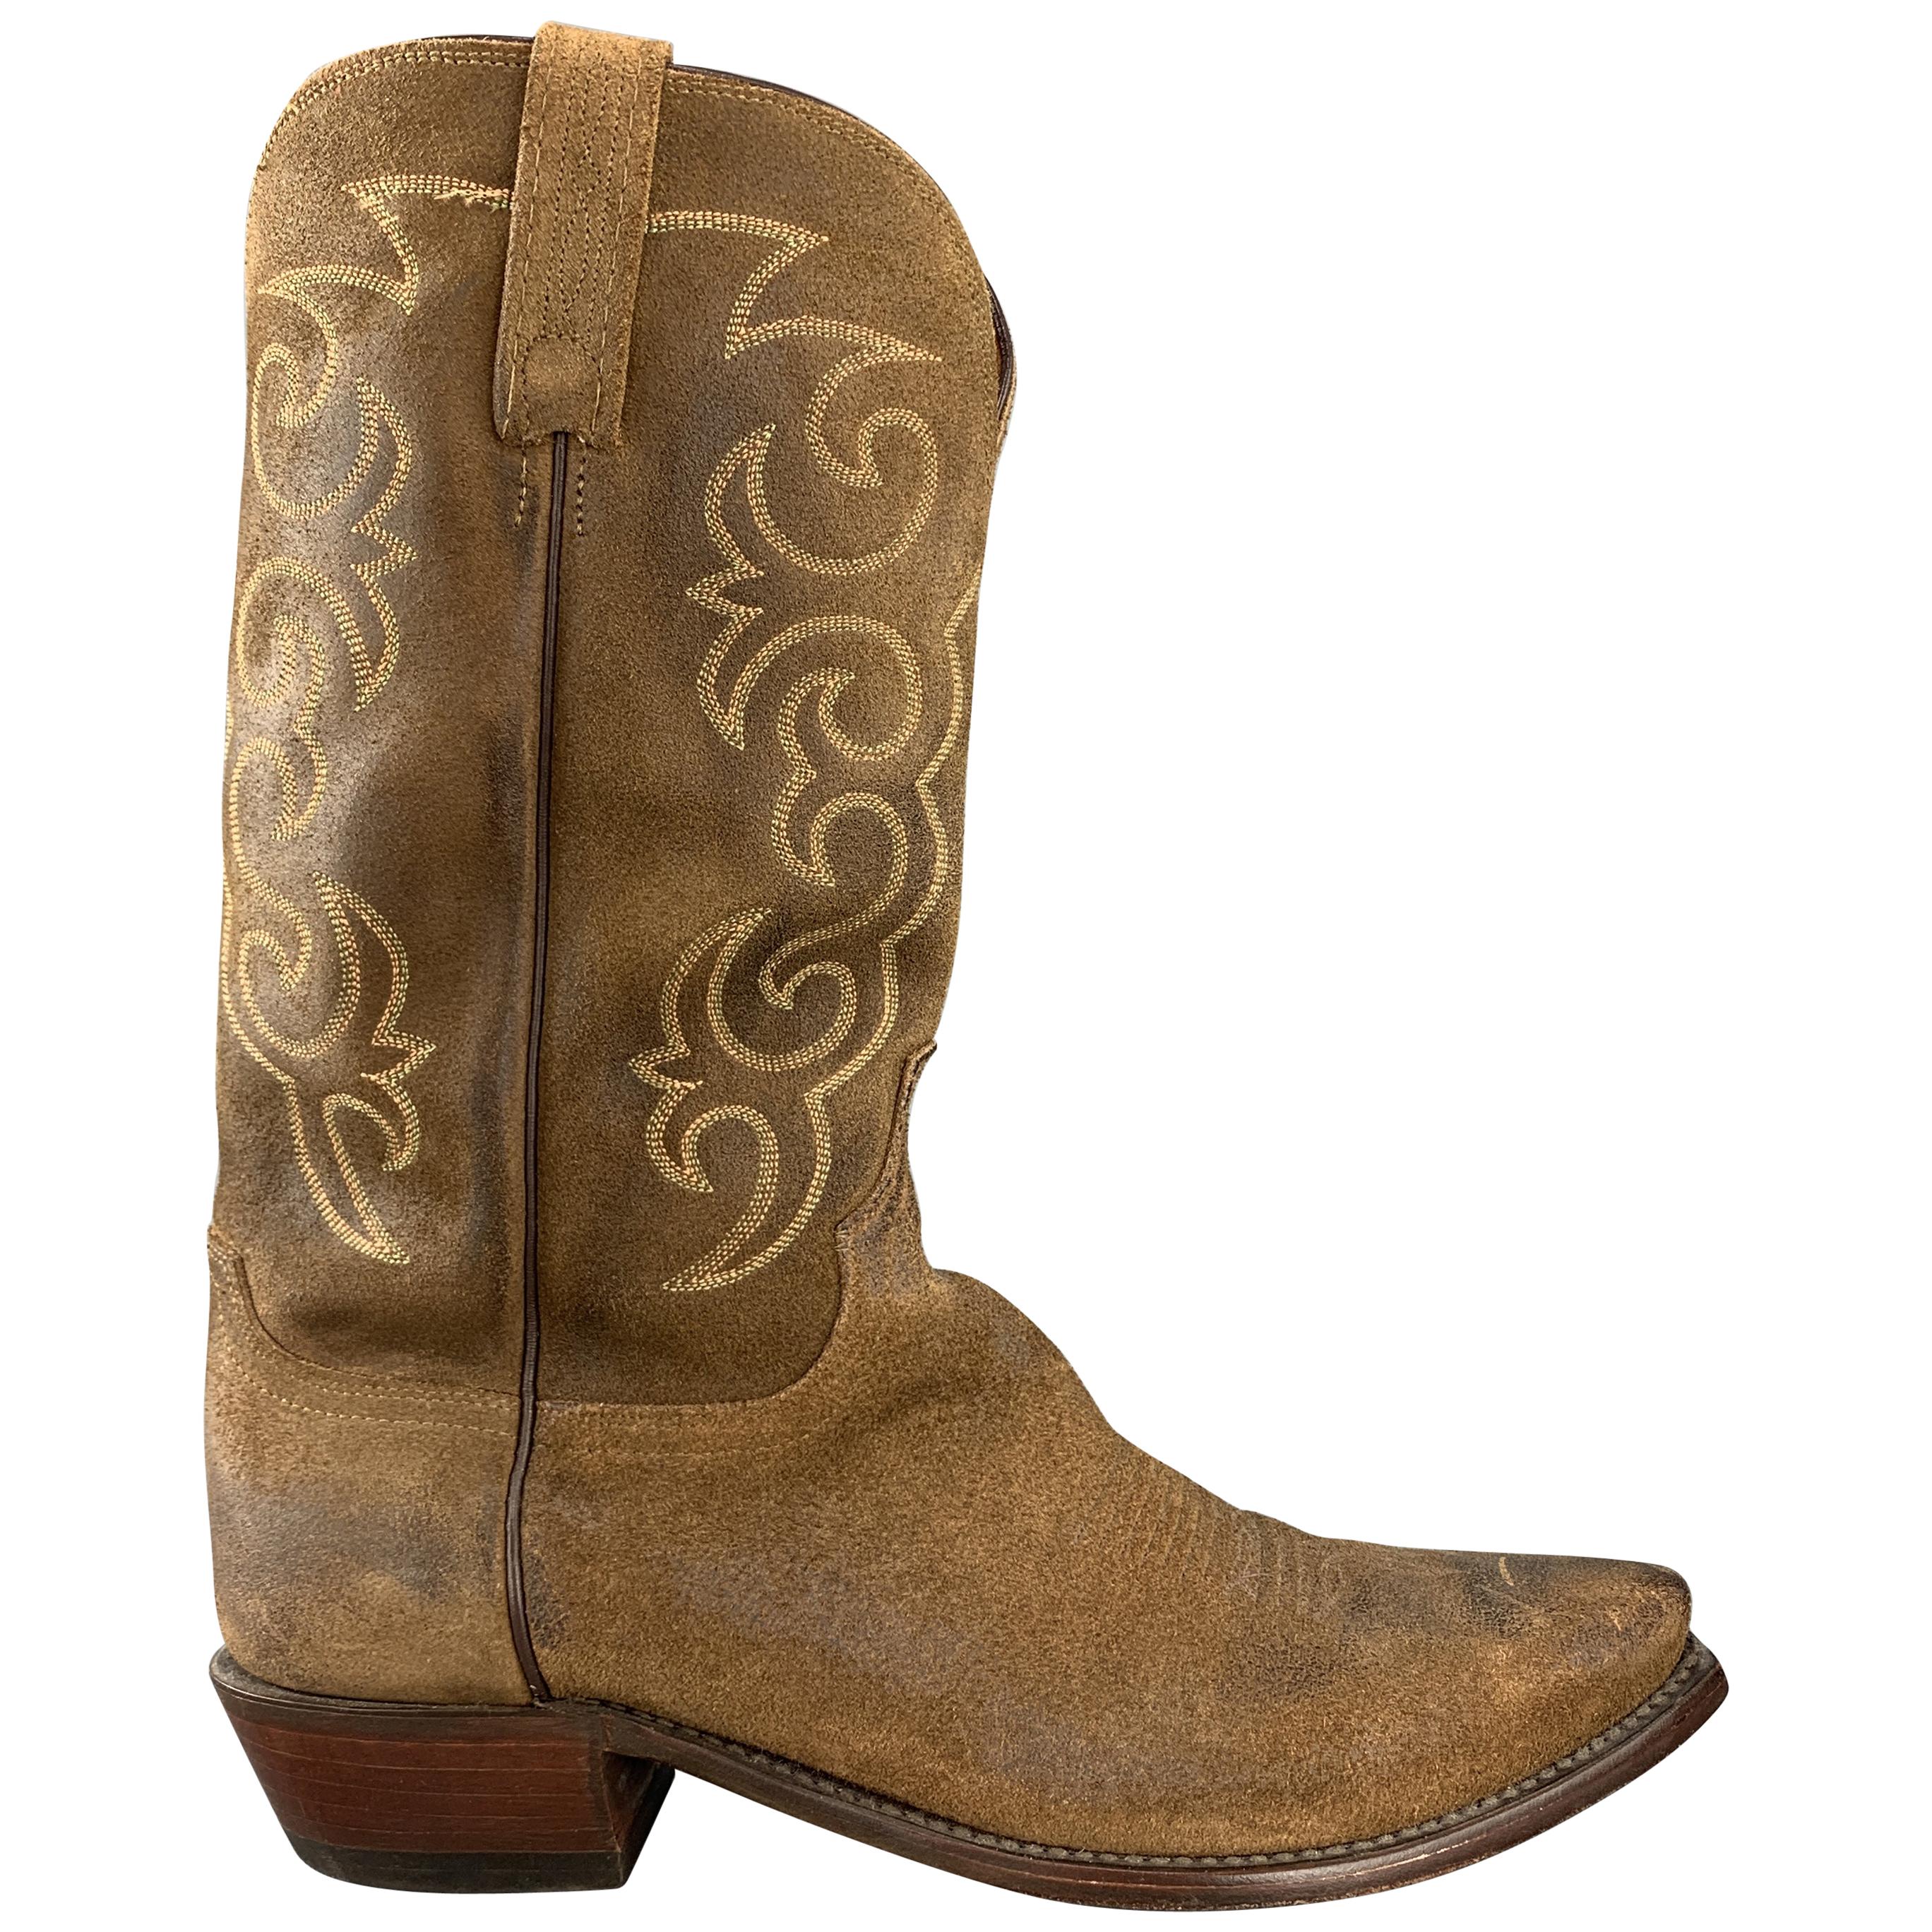 LUCCHESE 1883 Size 10.5 Brown Embroidered Suede Cowbow Boots